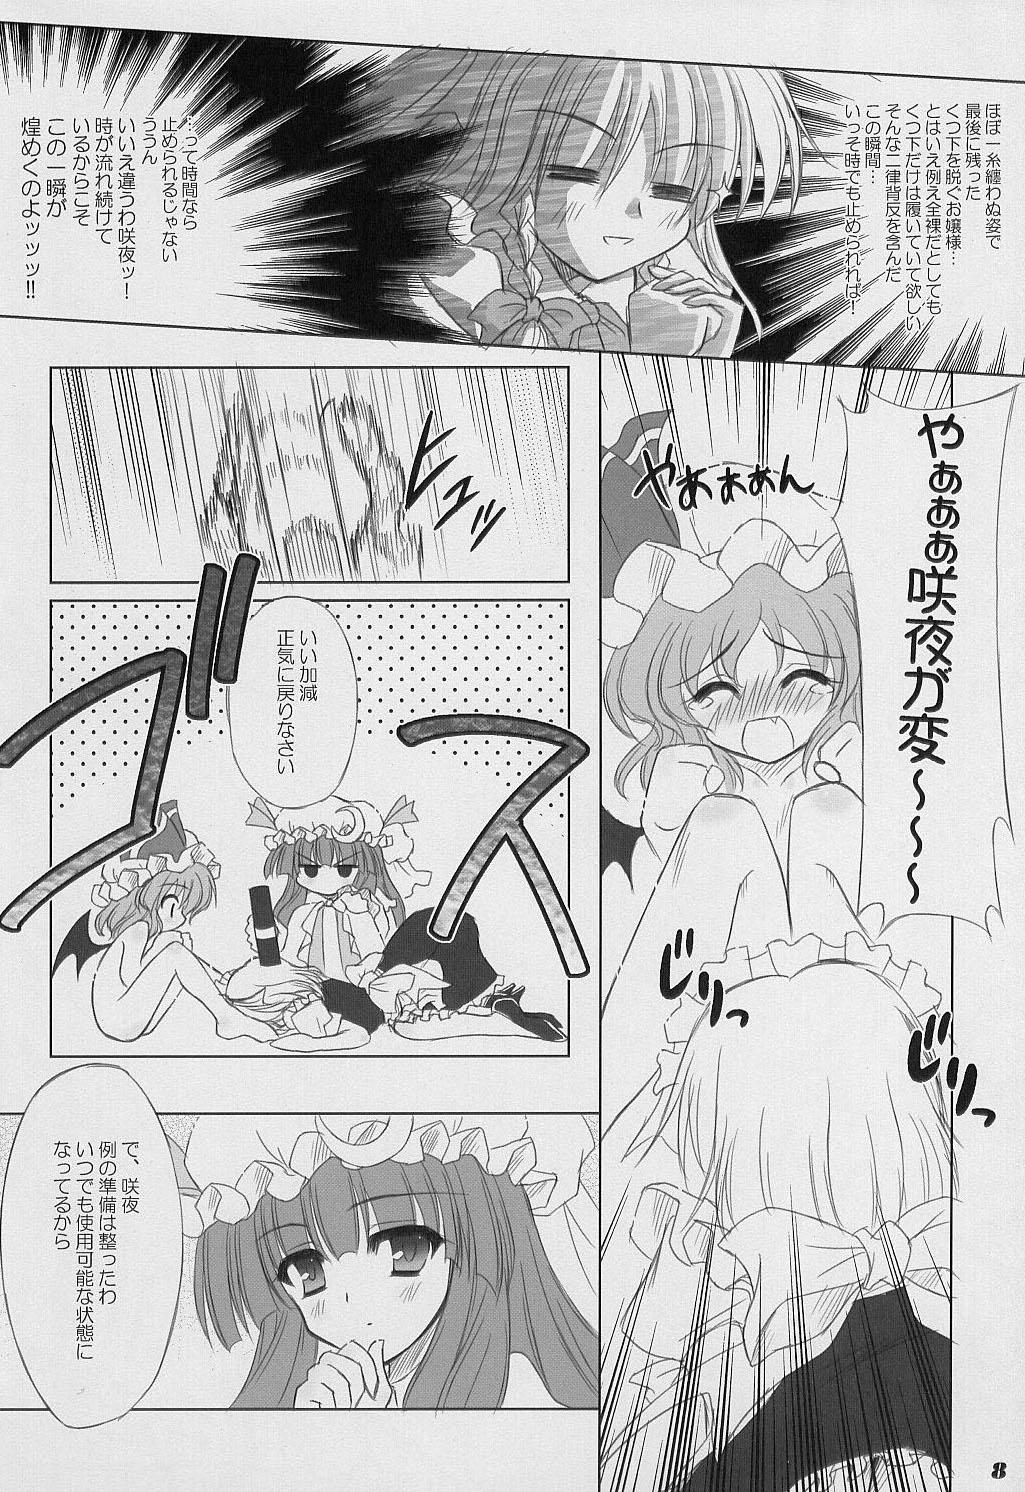 Boobies Twilight Syndrome - Touhou project Gayhardcore - Page 7